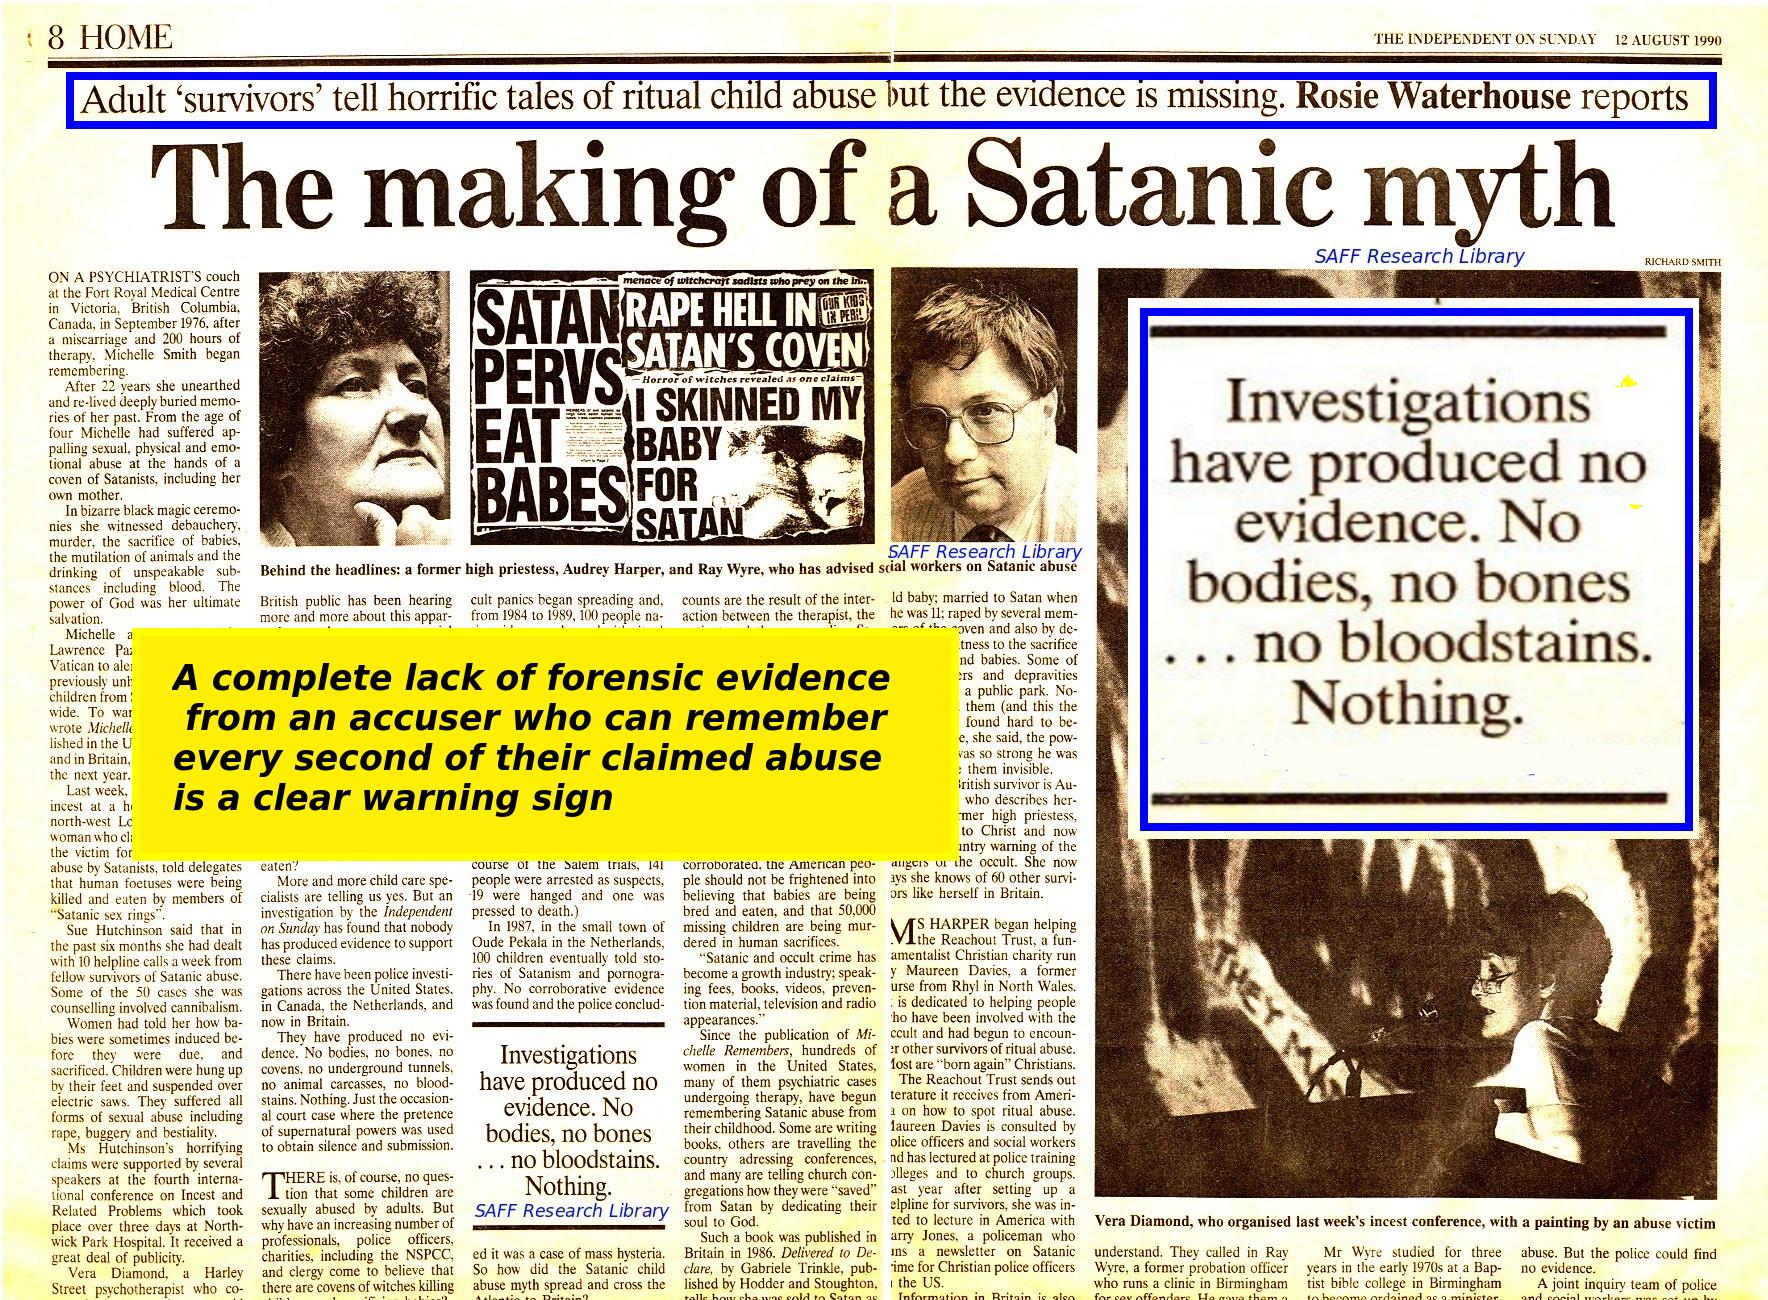 The Making of a Satanic Myth - Rosie Waterhouse. Independent on sunday 12 Augus 1990